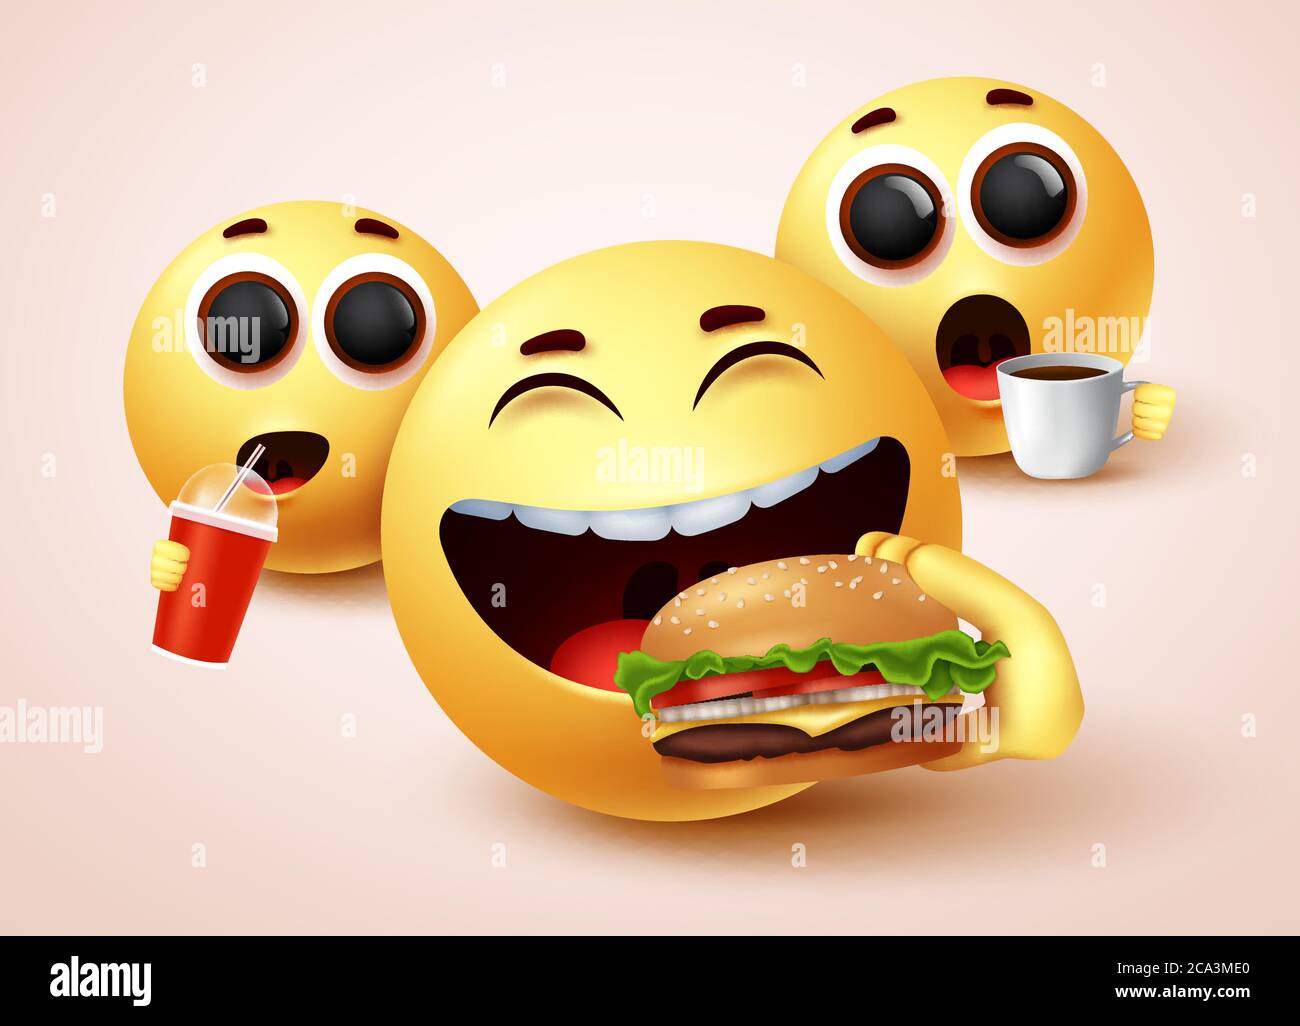 Smiley emoji eating fast food burger vector character design. Smiley emoticon with happy facial expressions while eating yummy snacks like hamburger Stock Vector